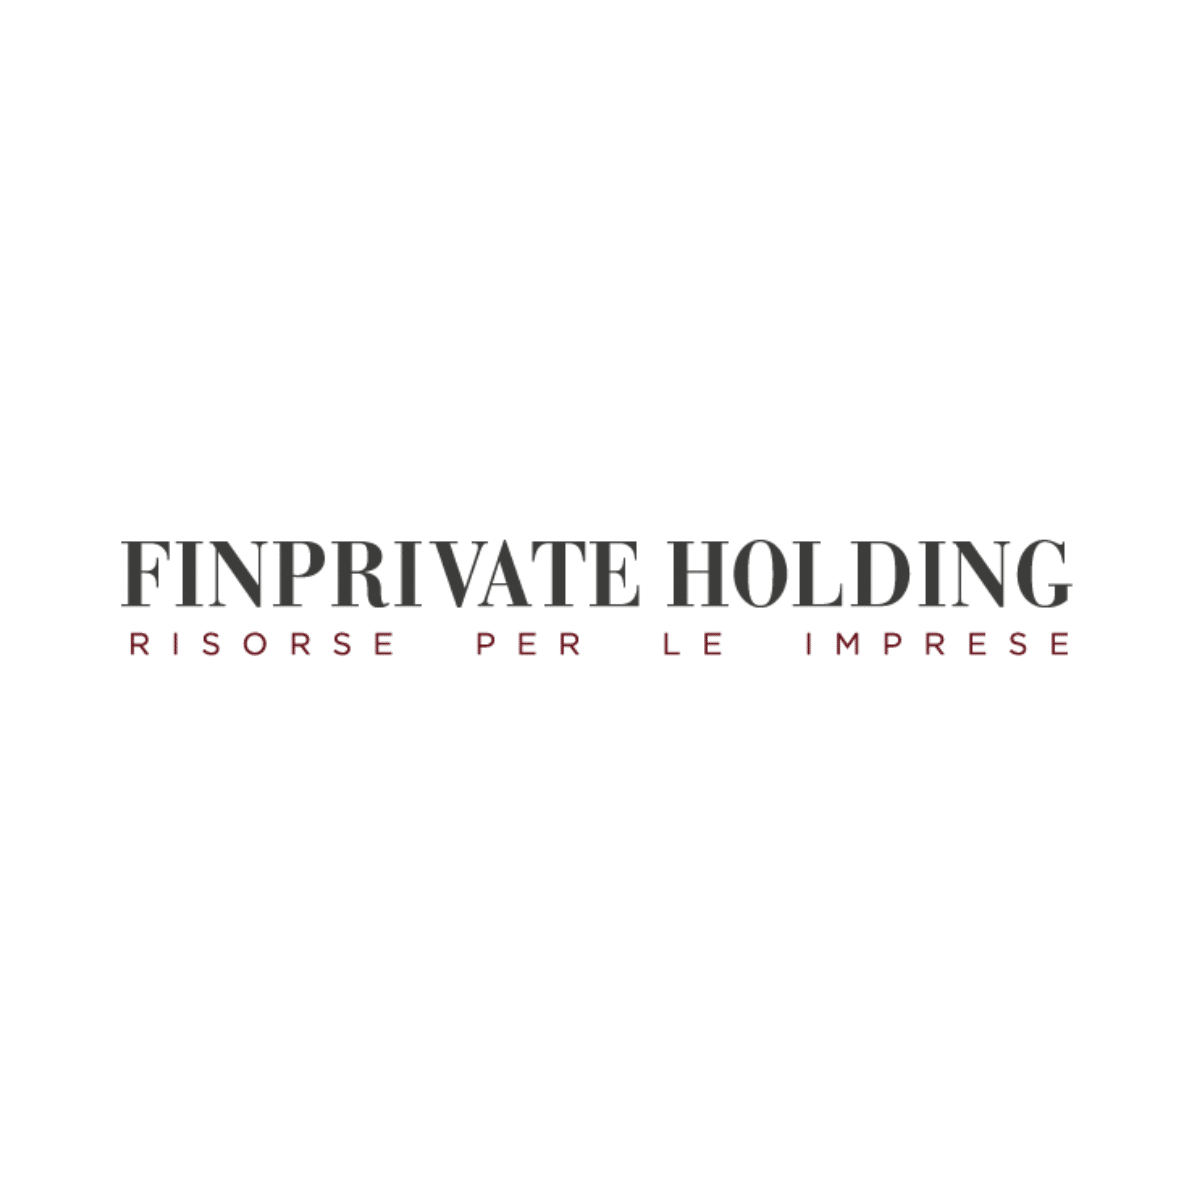 FINPRIVATE HOLDING